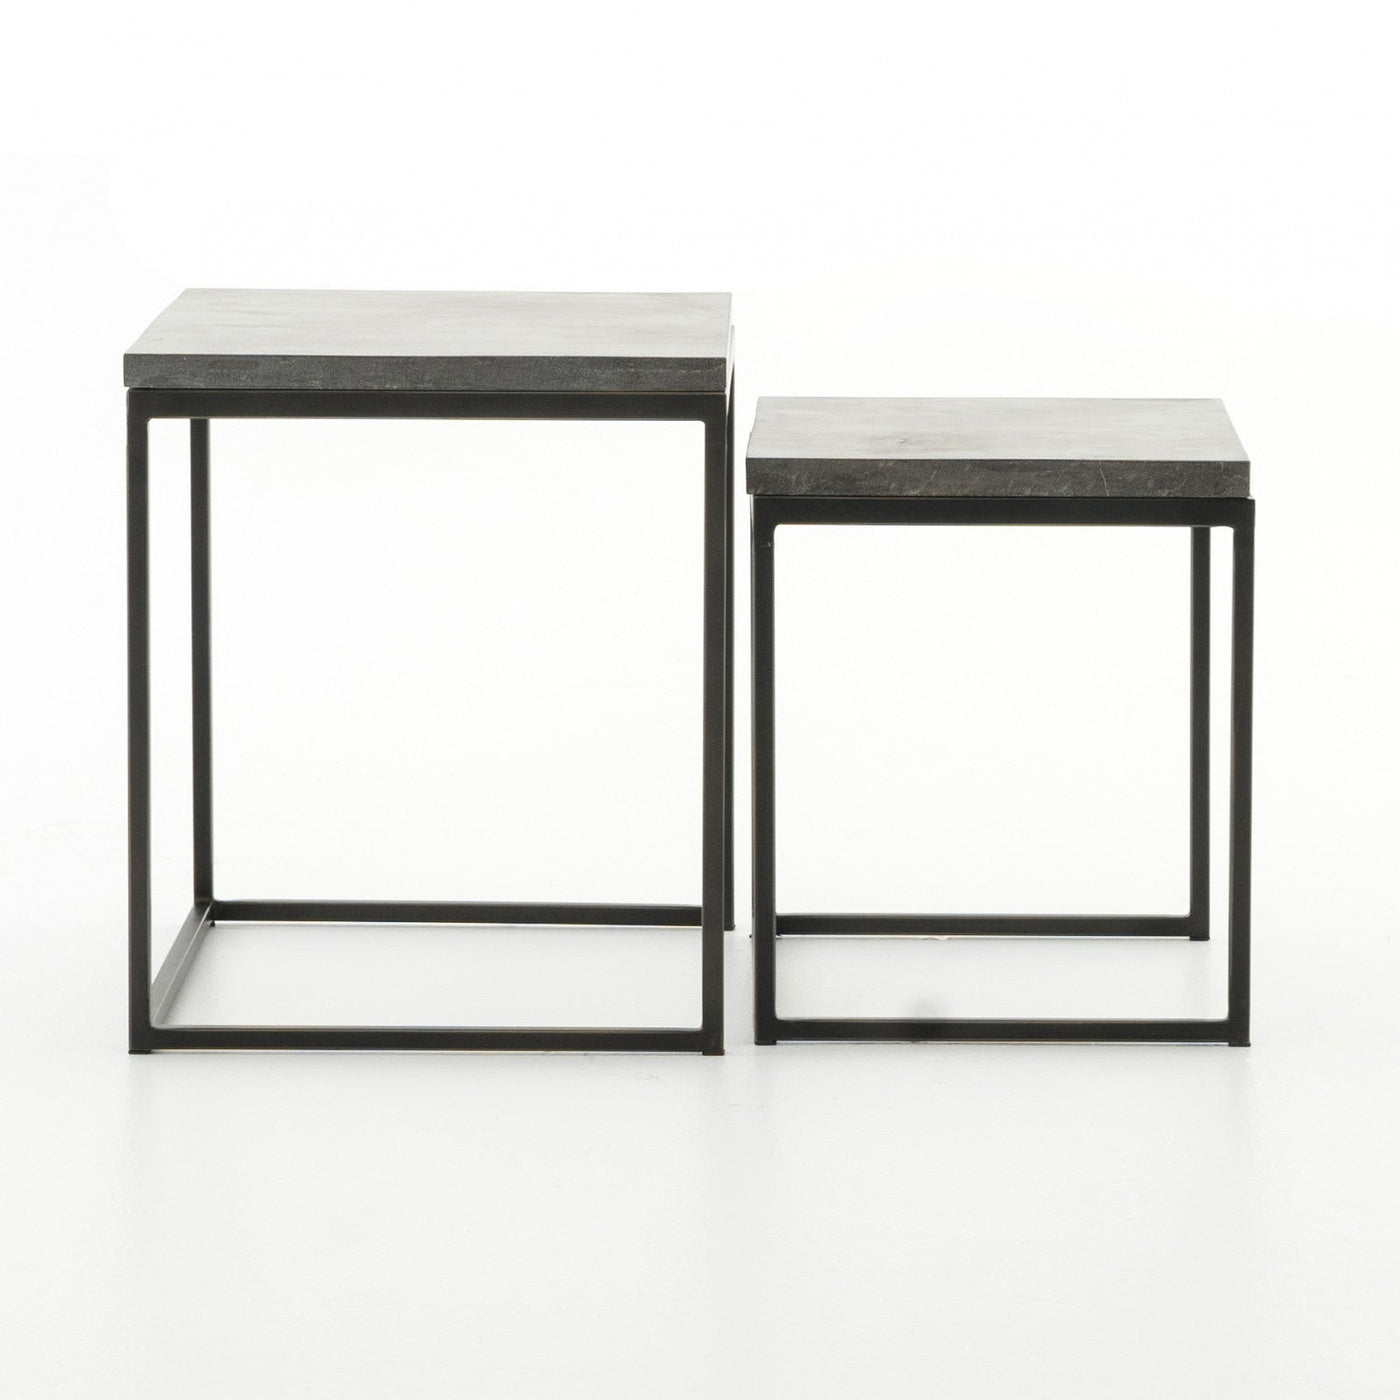 HARLOW NESTING END TABLES